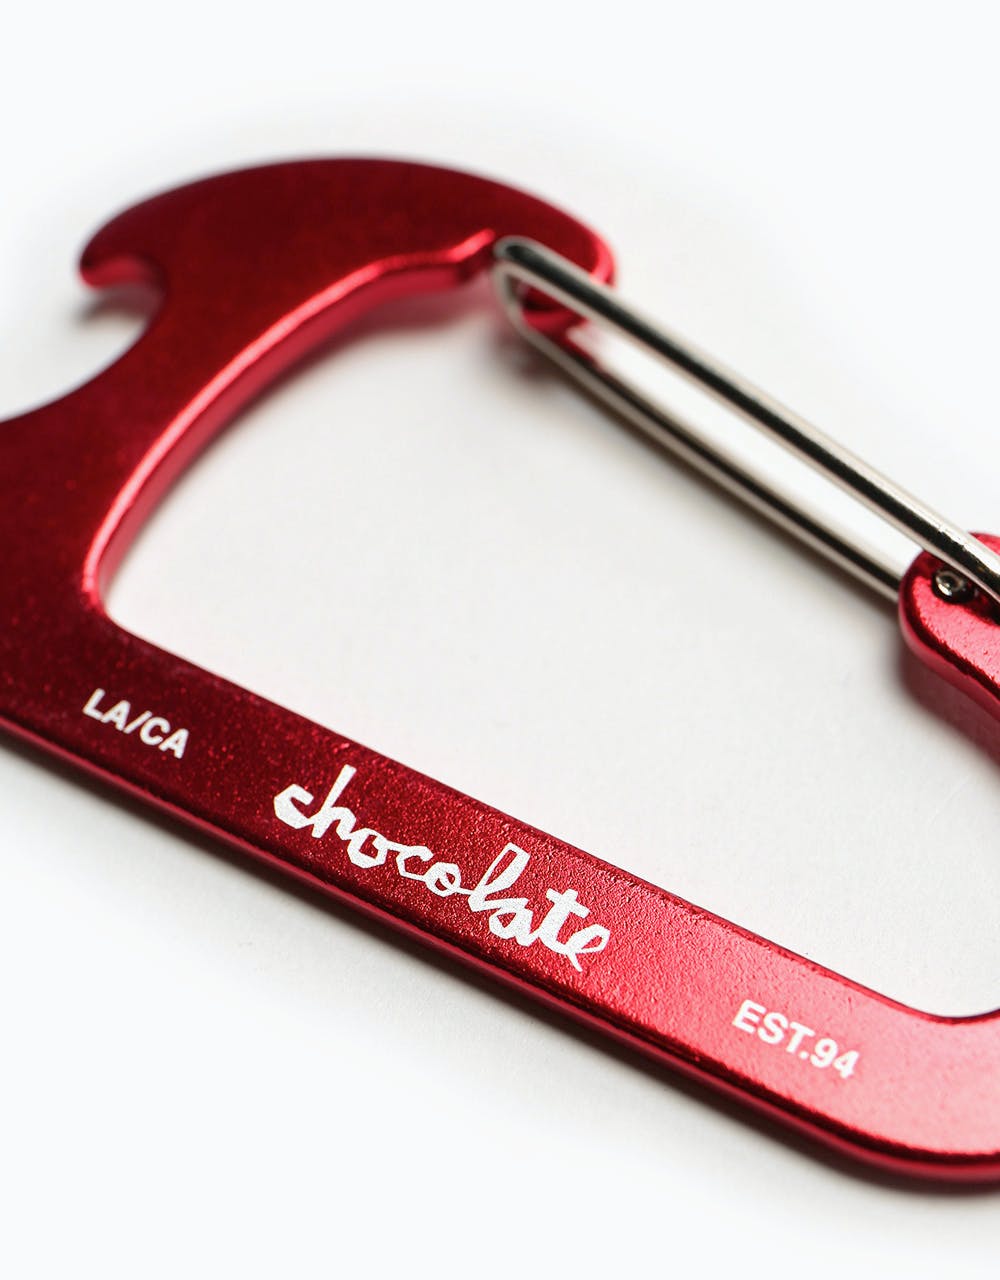 Chocolate Carabiner - Red